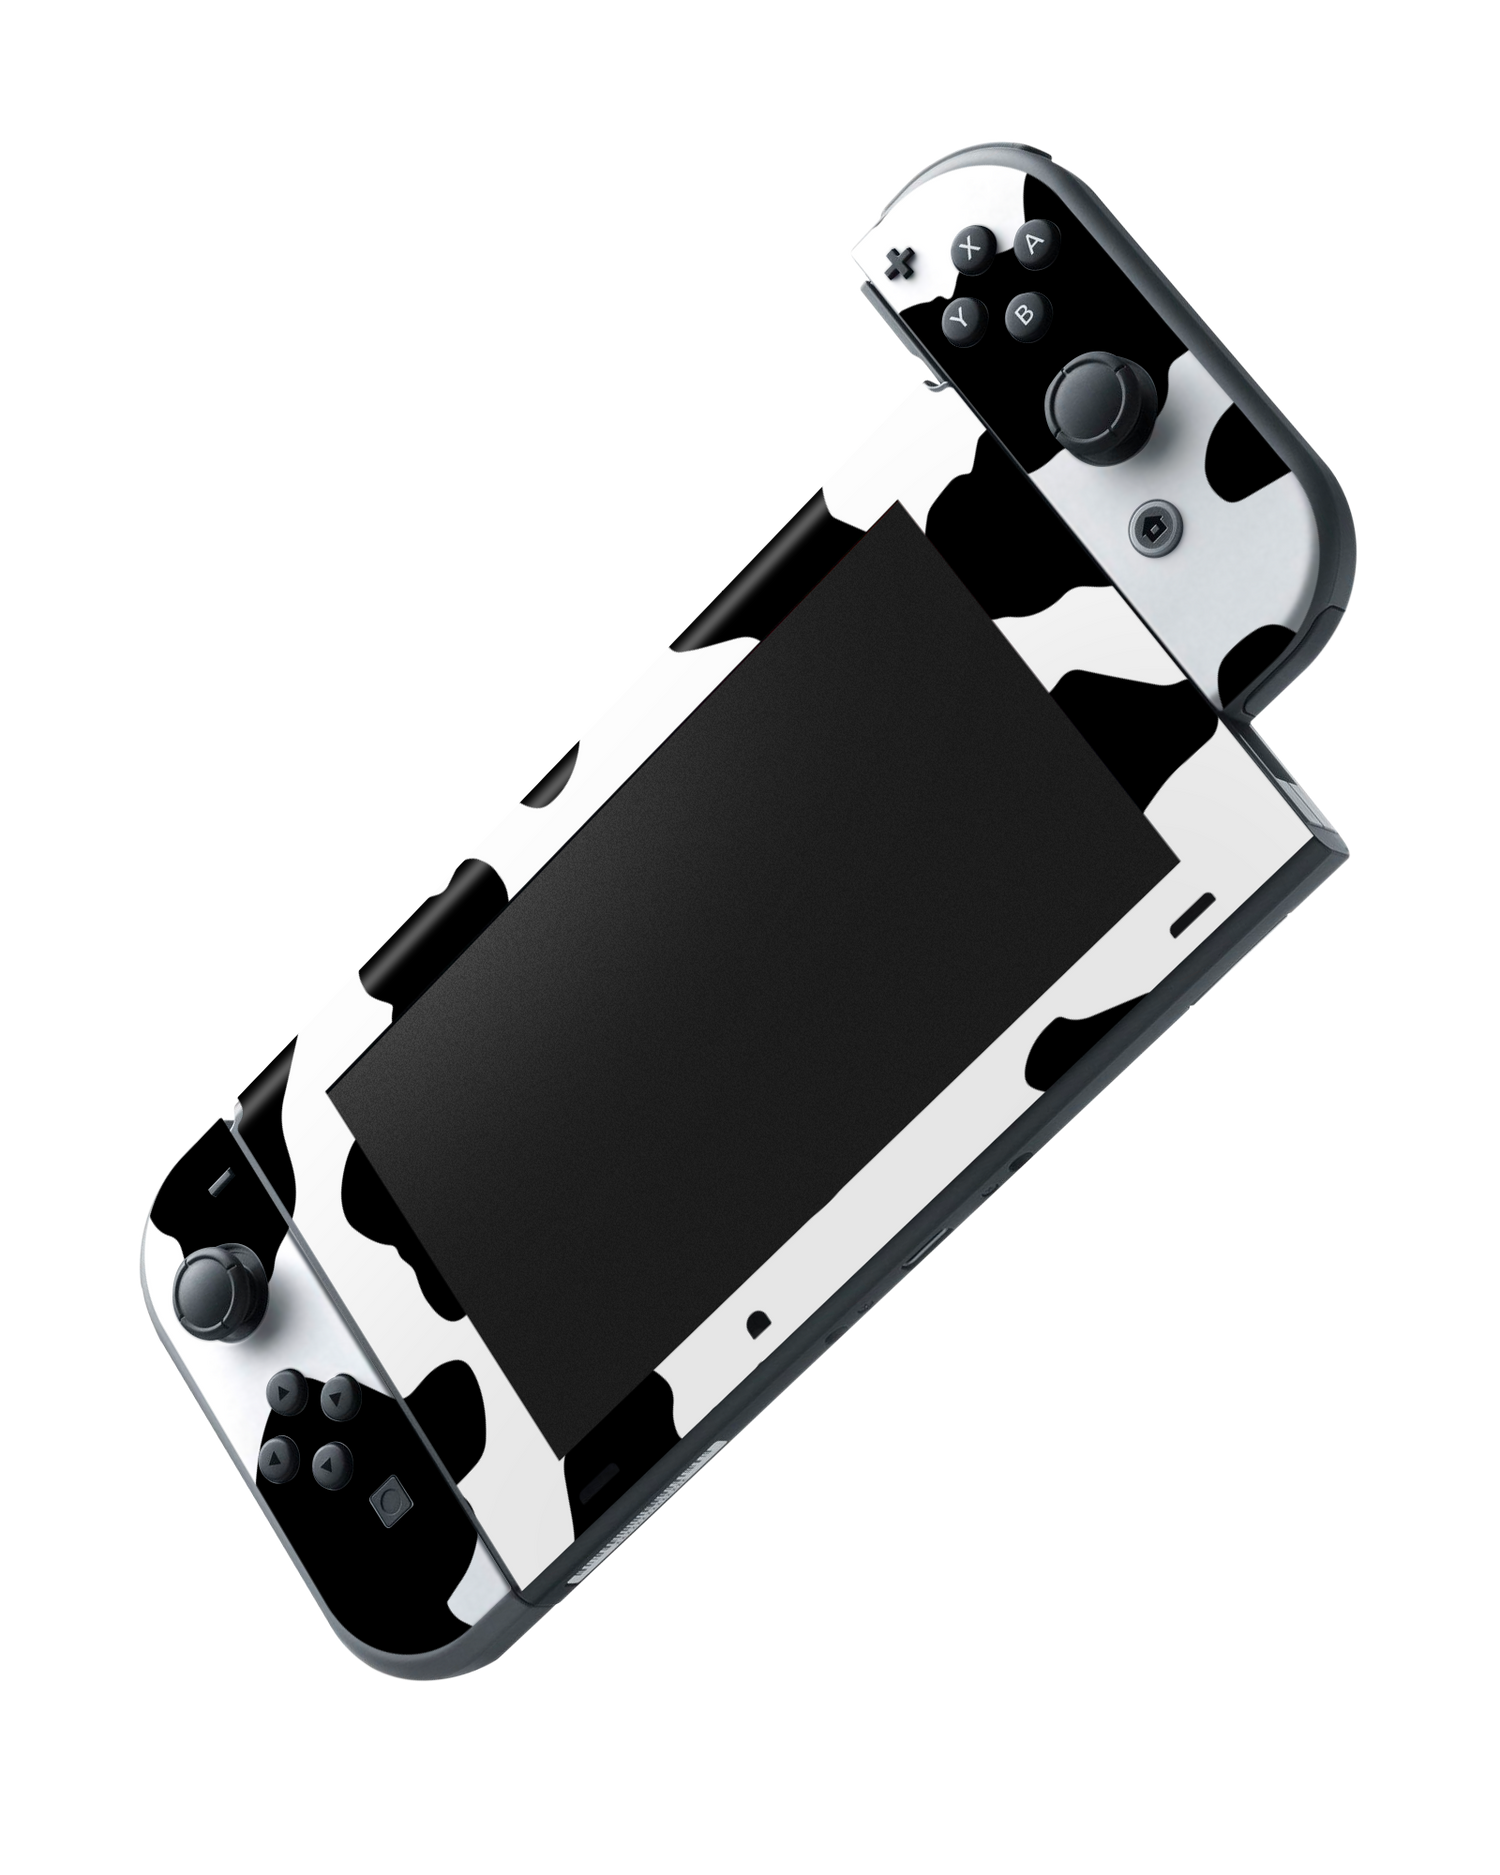 Cow Print 2 Console Skin for Nintendo Switch: Joy-Con removing 